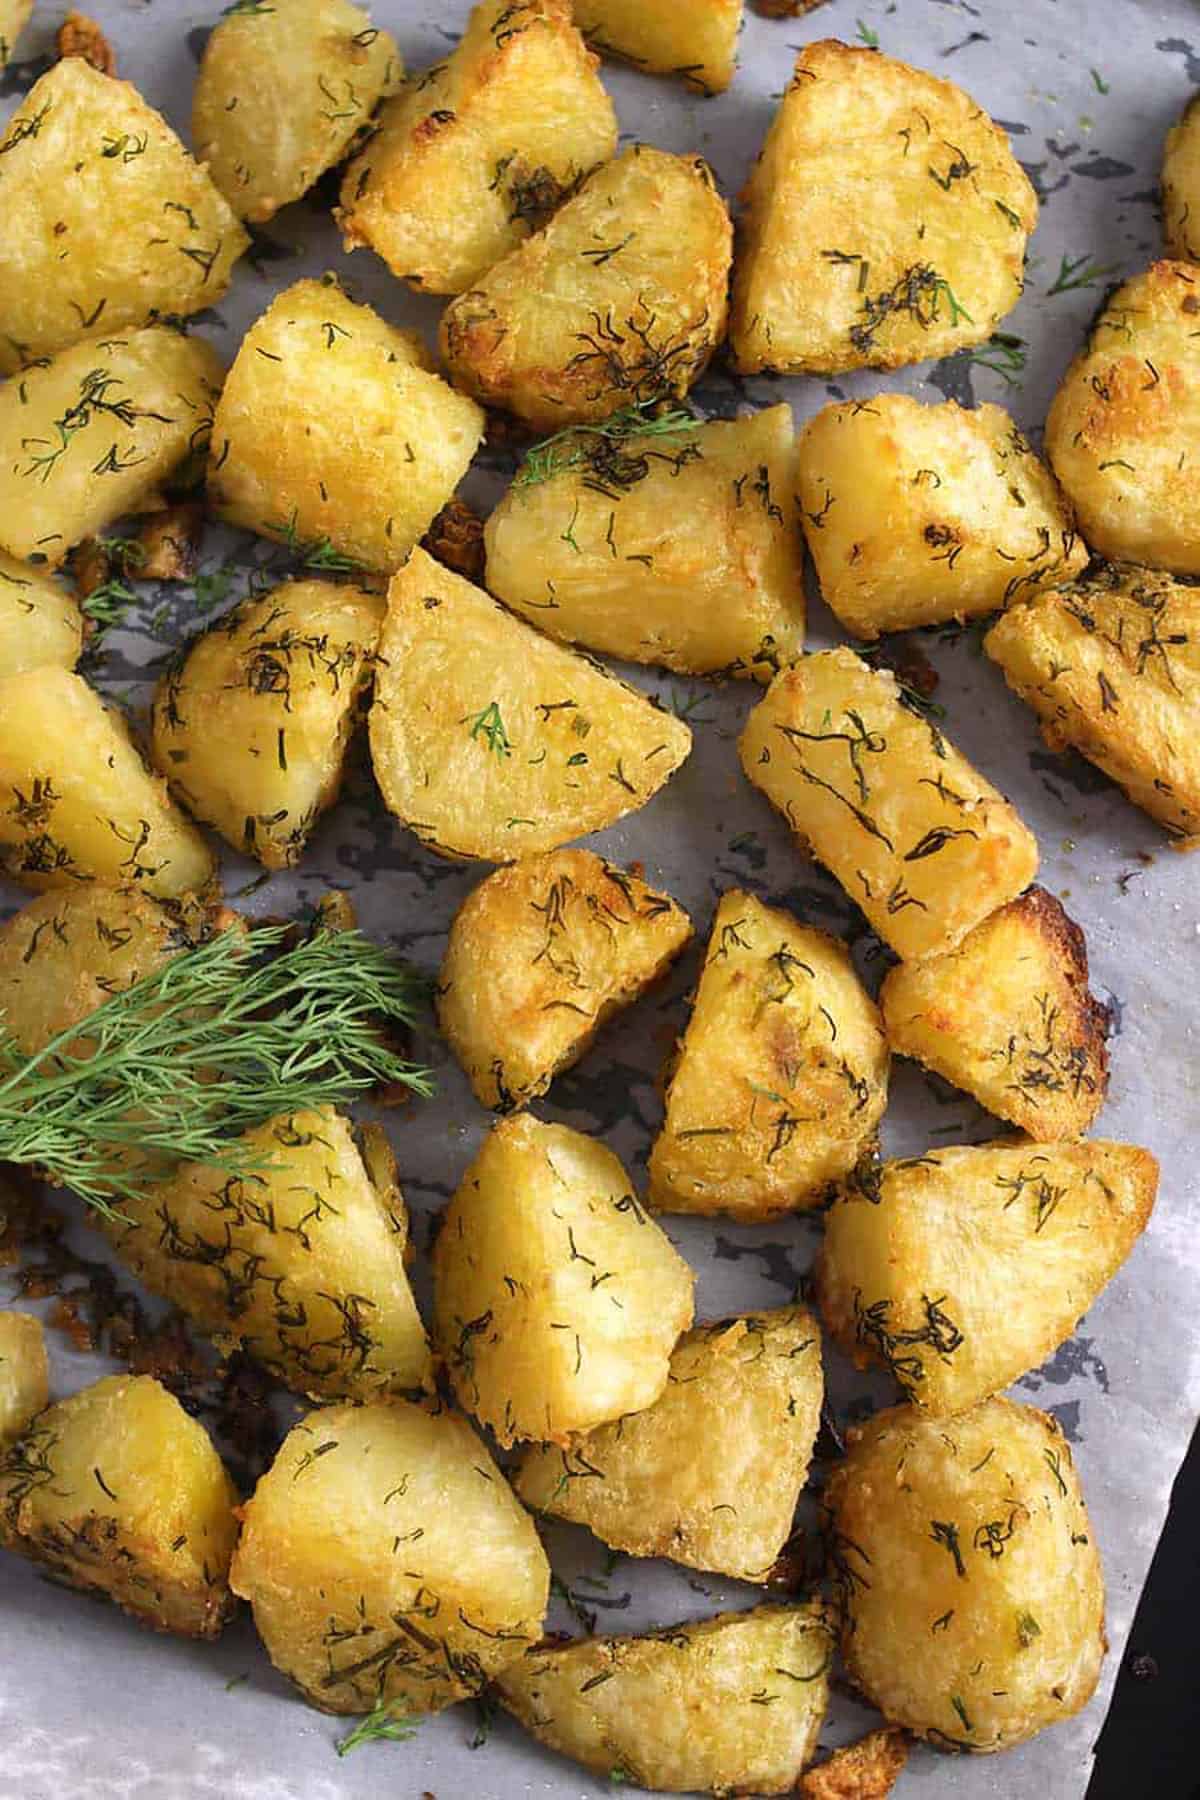 Roasted garlic-herb potatoes garnished with fresh dill leaves in a baking pan.